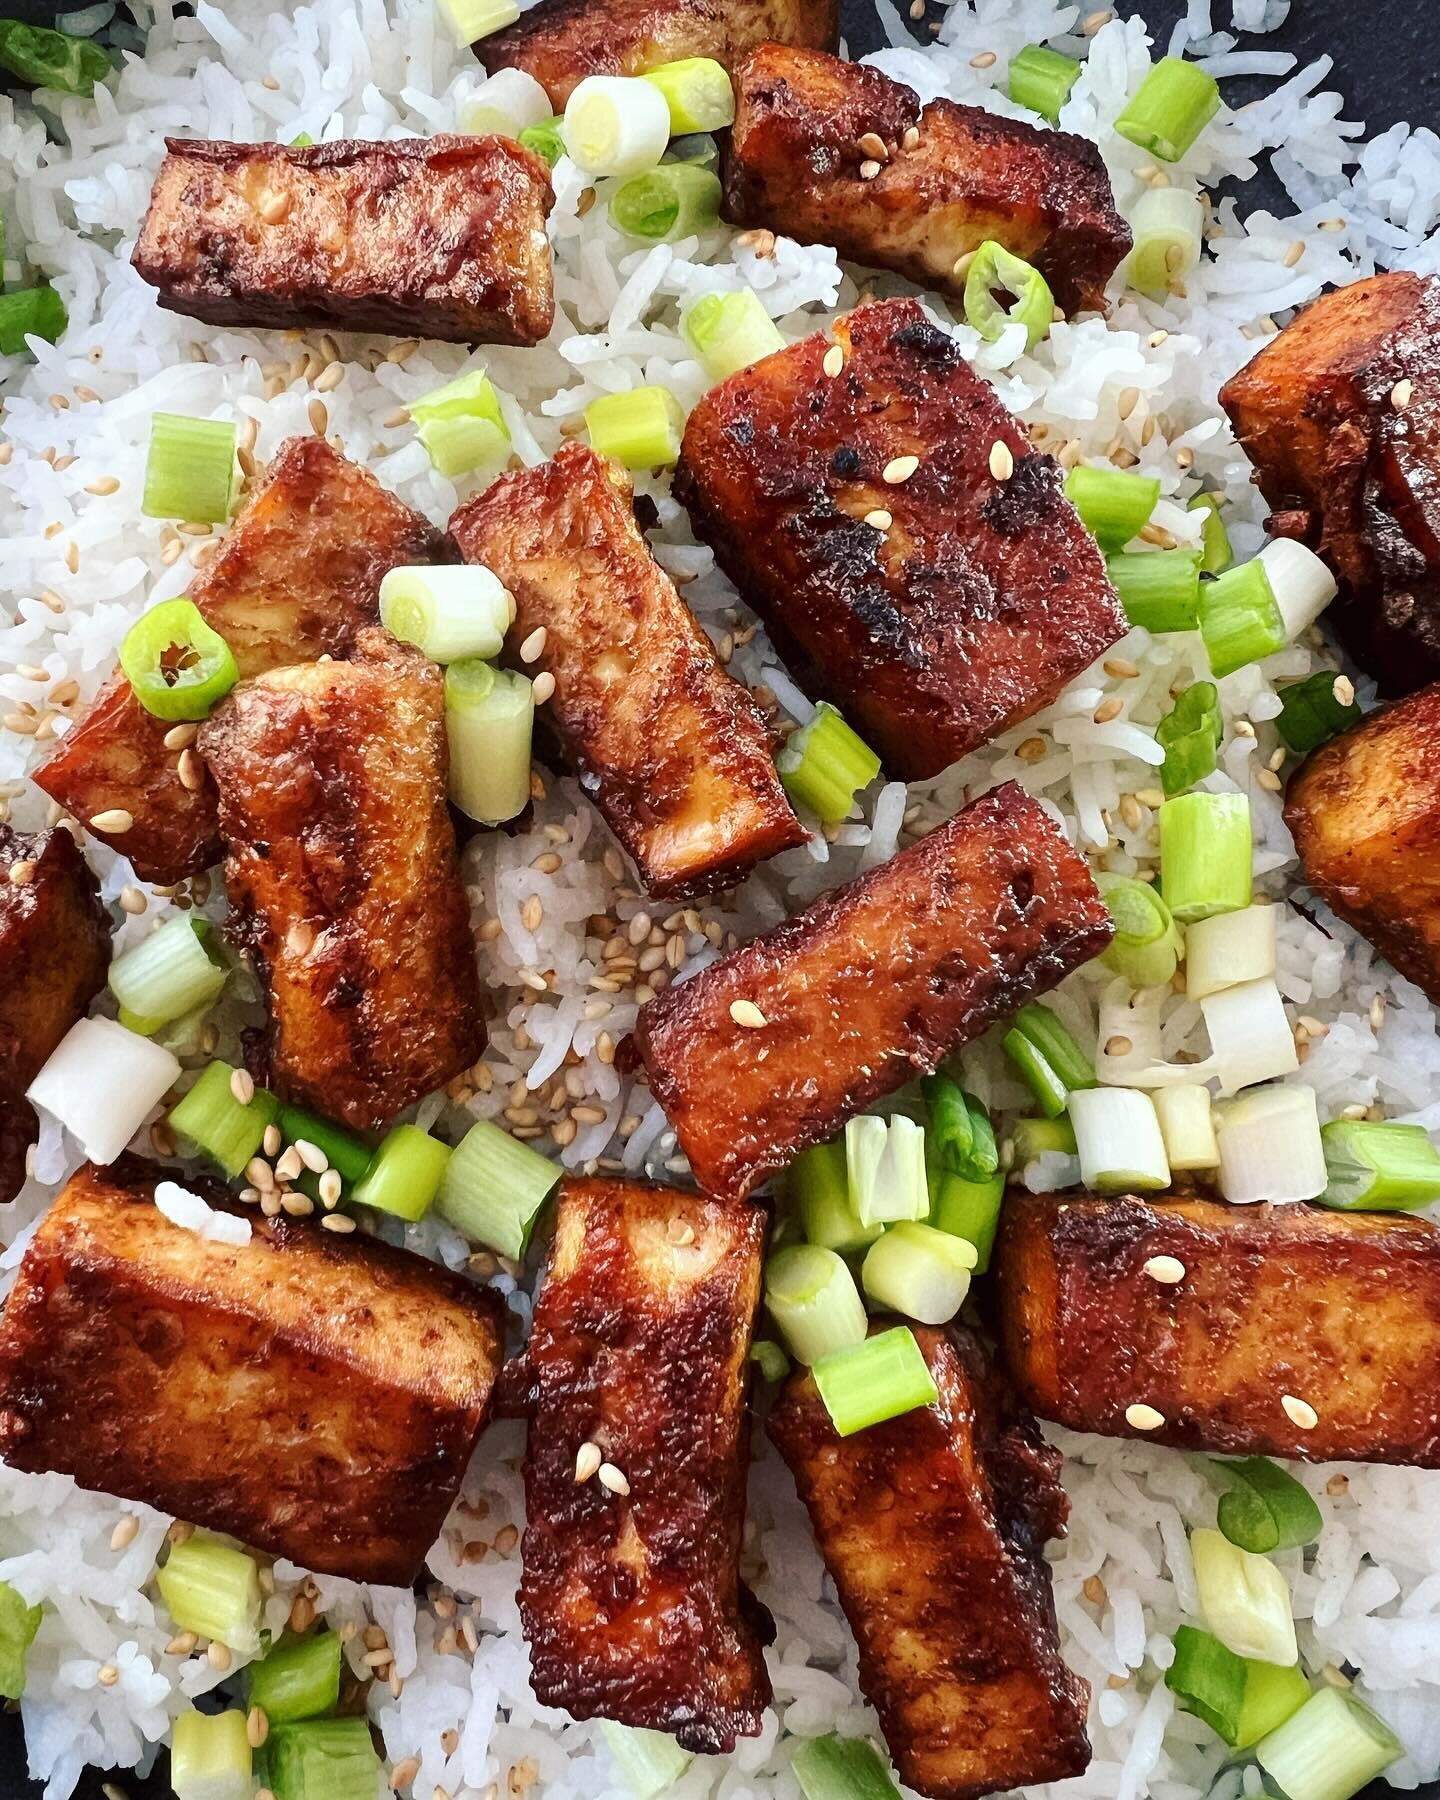 10-degree Saturdays are for trying new tofu recipes! 😋 I&rsquo;m currently feeling bored of my usual lazy repetitive meal rotation and want to experiment more with new recipes. So if you have any favorite vegan recipes please share! 🥰